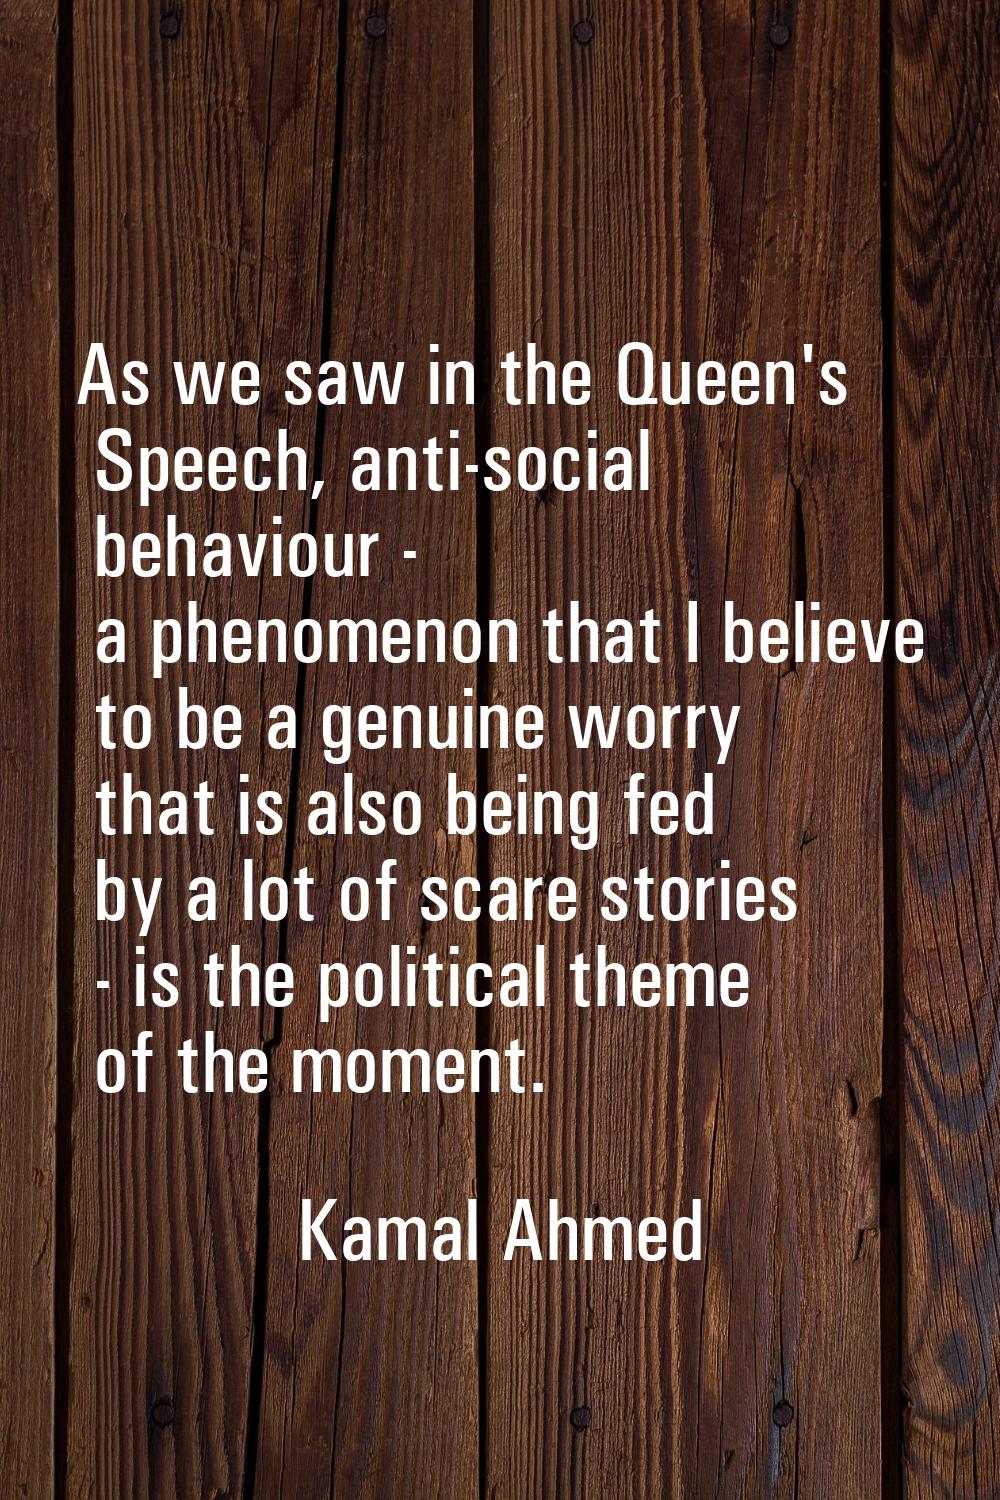 As we saw in the Queen's Speech, anti-social behaviour - a phenomenon that I believe to be a genuin